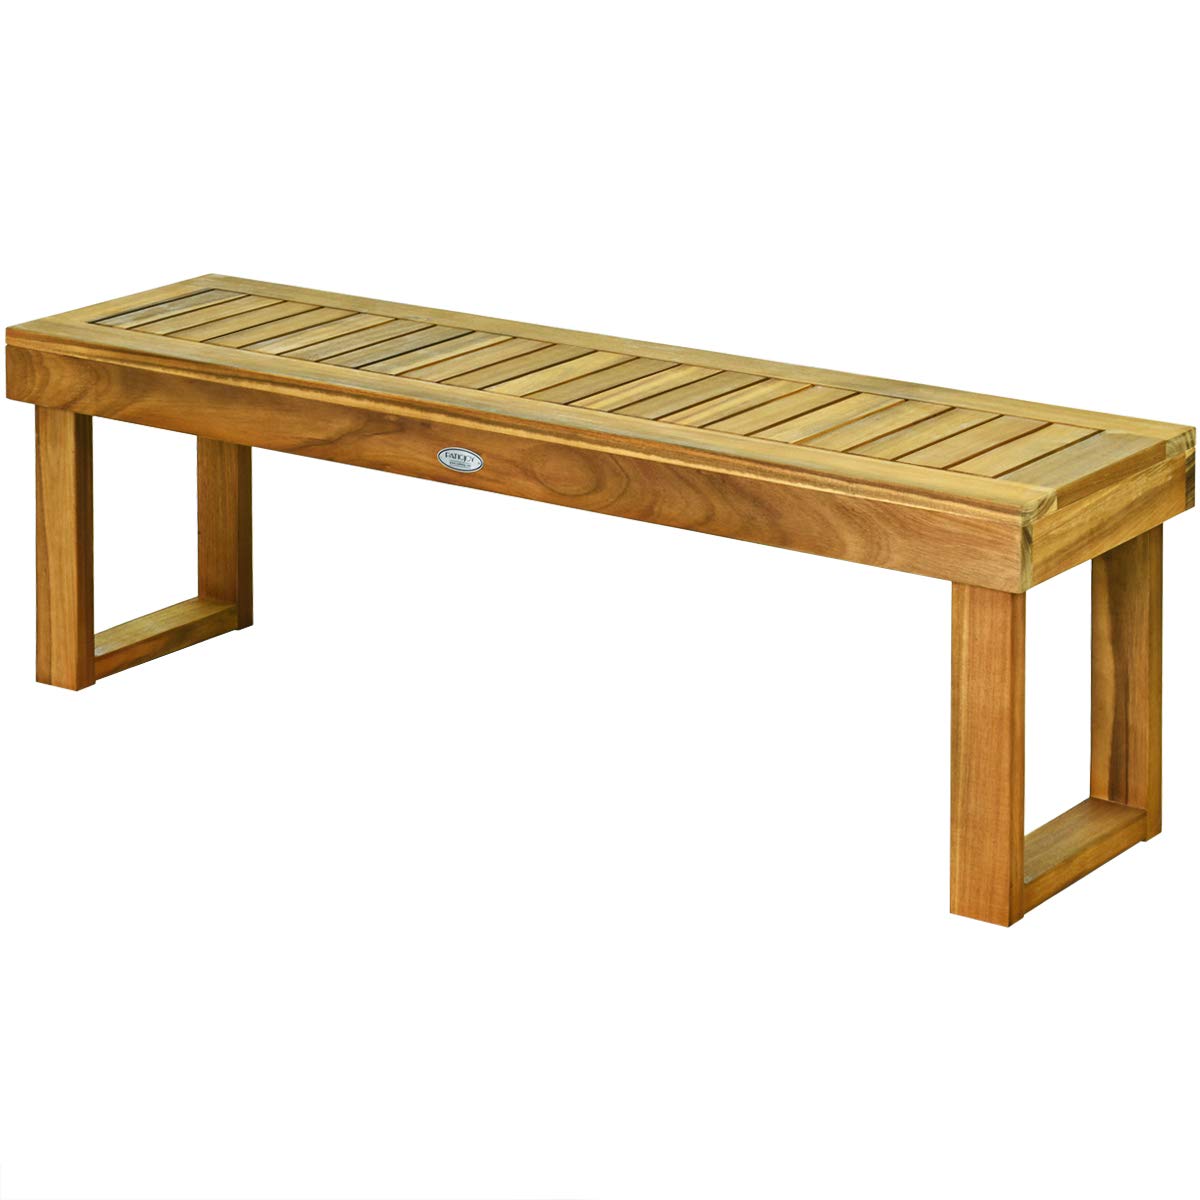 Tangkula 52 Inches Acacia Wood Outdoor Bench, Wood Bench for Dining Room Entryway Poolside Garden, Patio Backless Dining Bench with Slatted Seat,